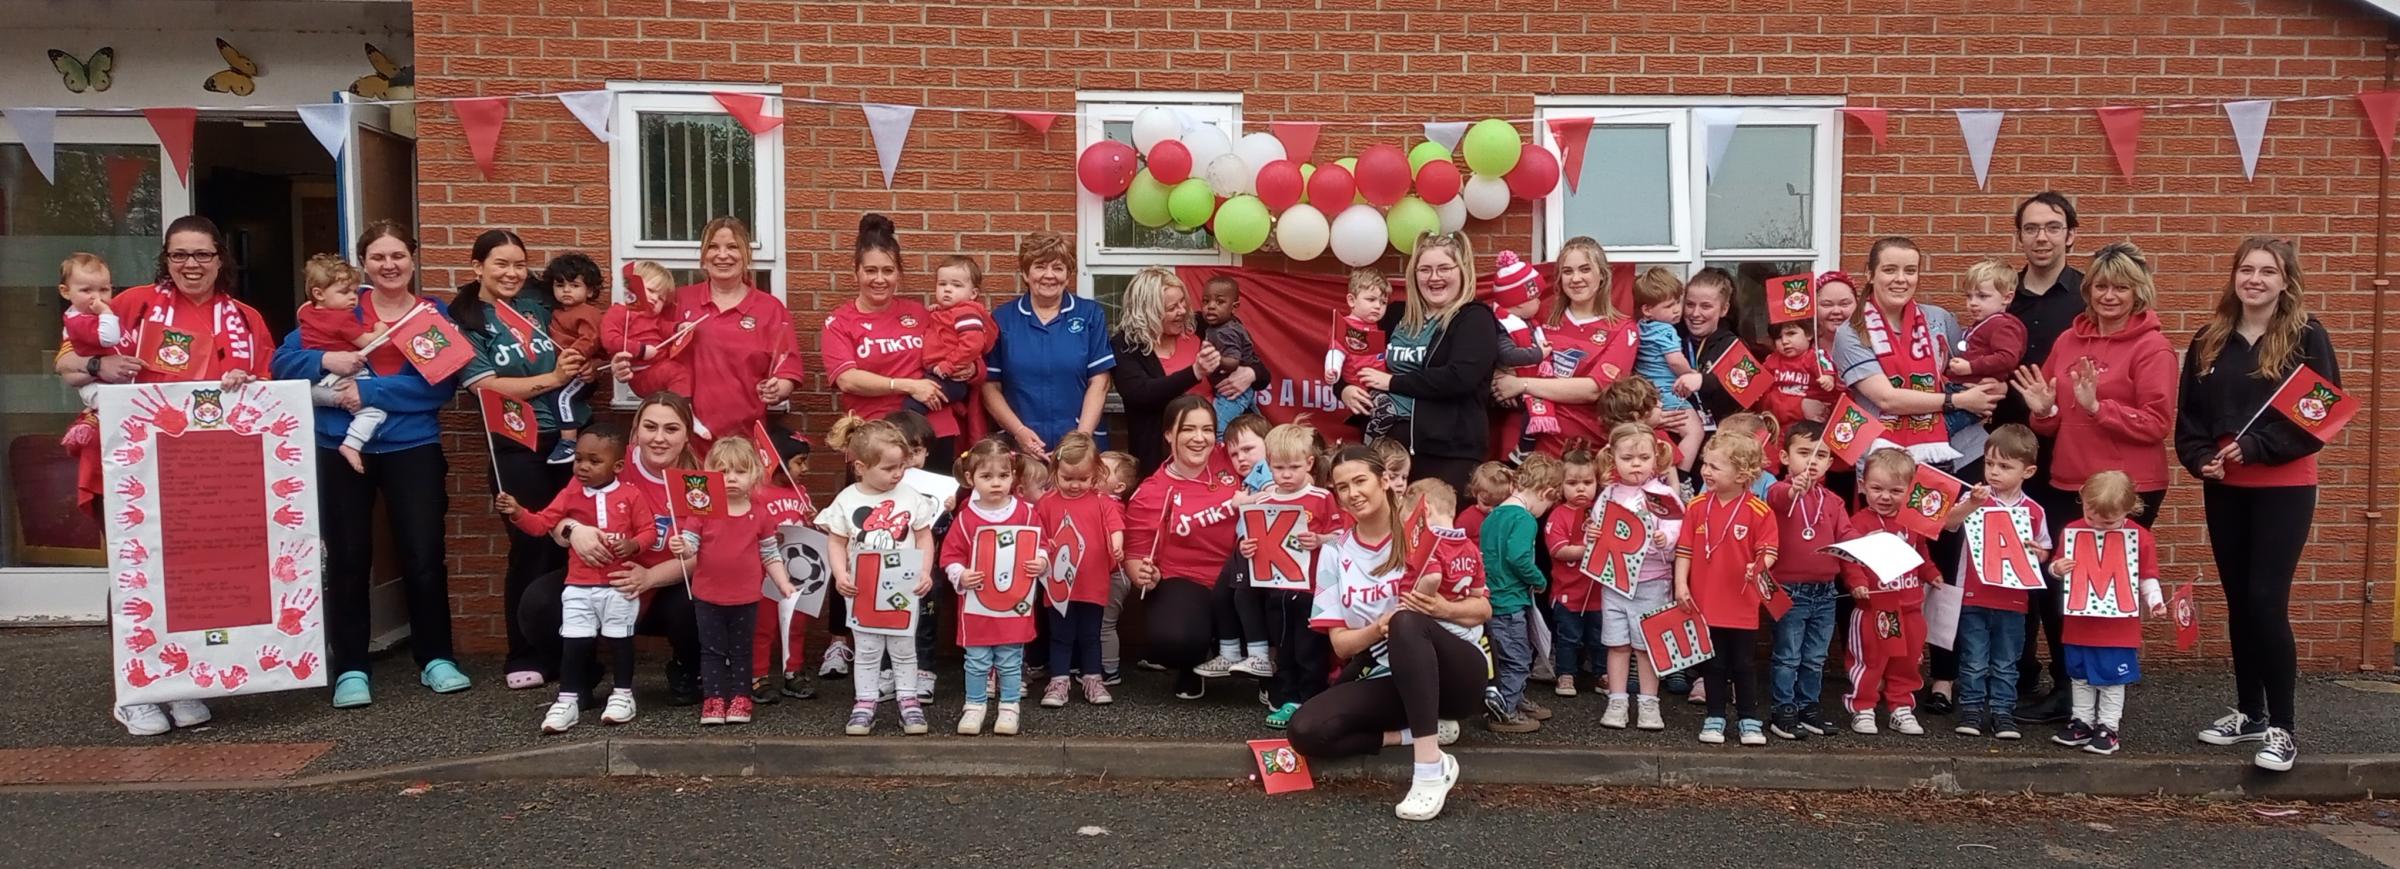 Support for Wrexham AFC from all at Peter Pan Nursery in Wrexham.